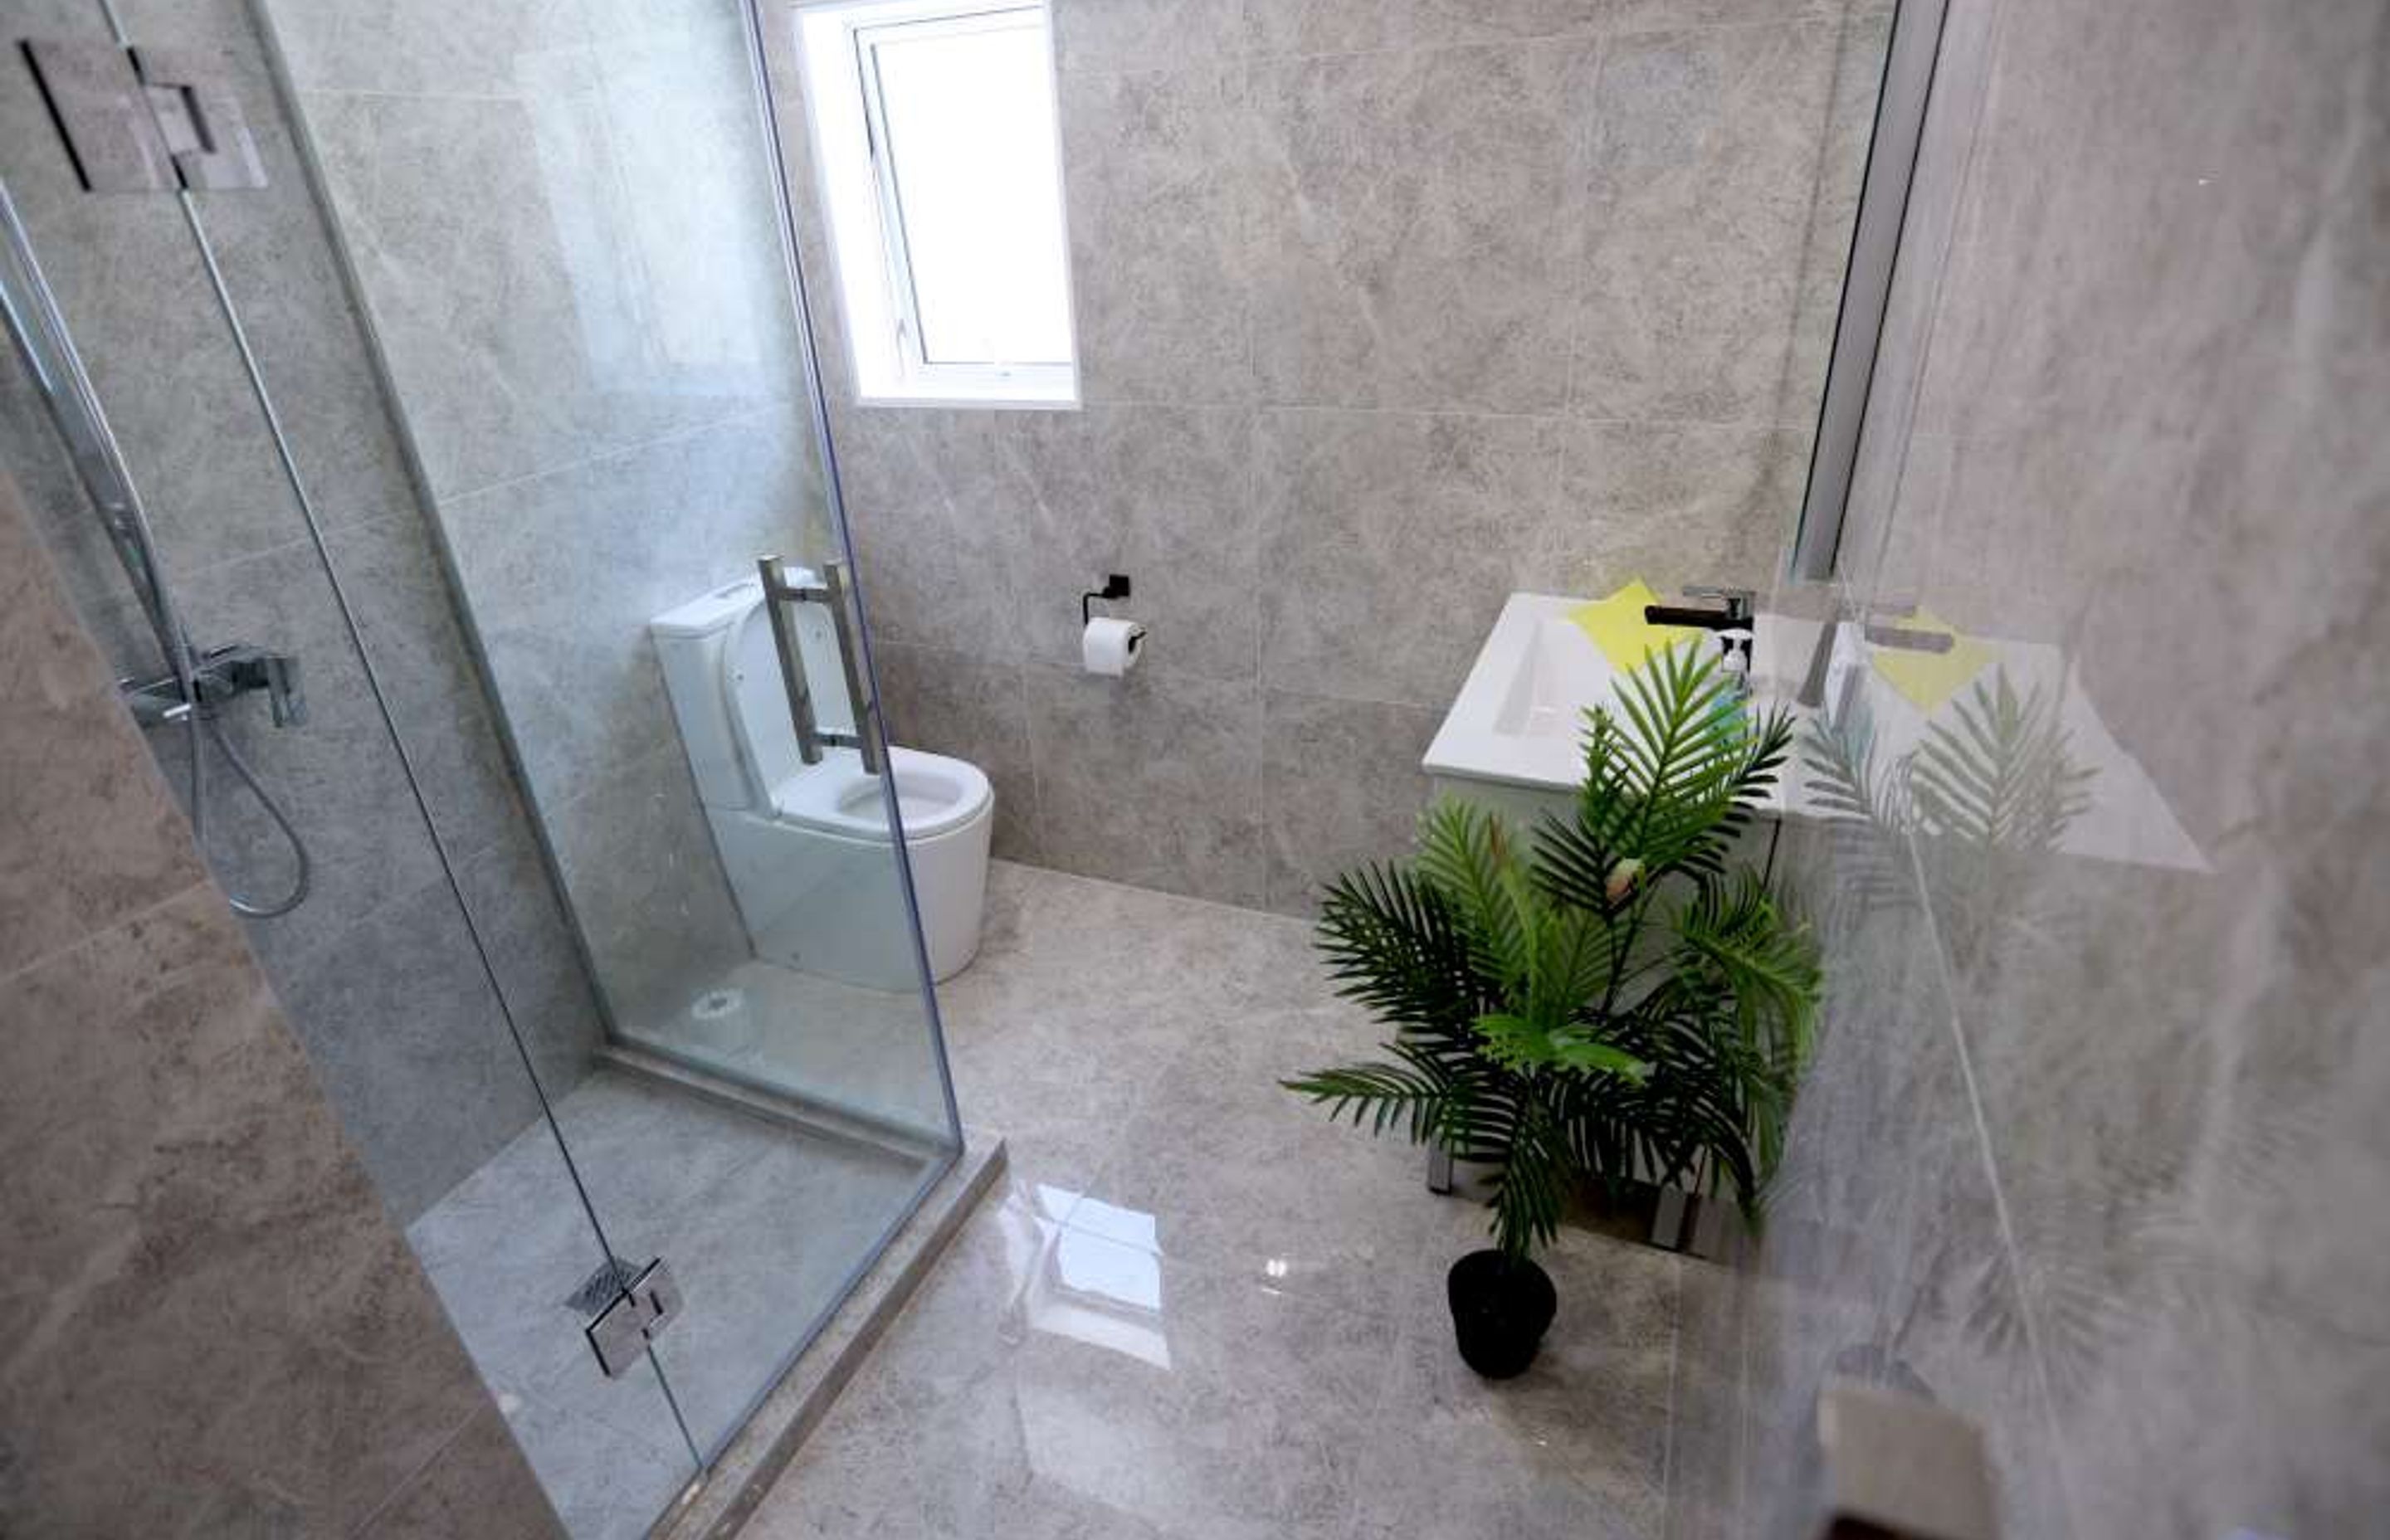 600 by 900 tiles used in this small bathroom